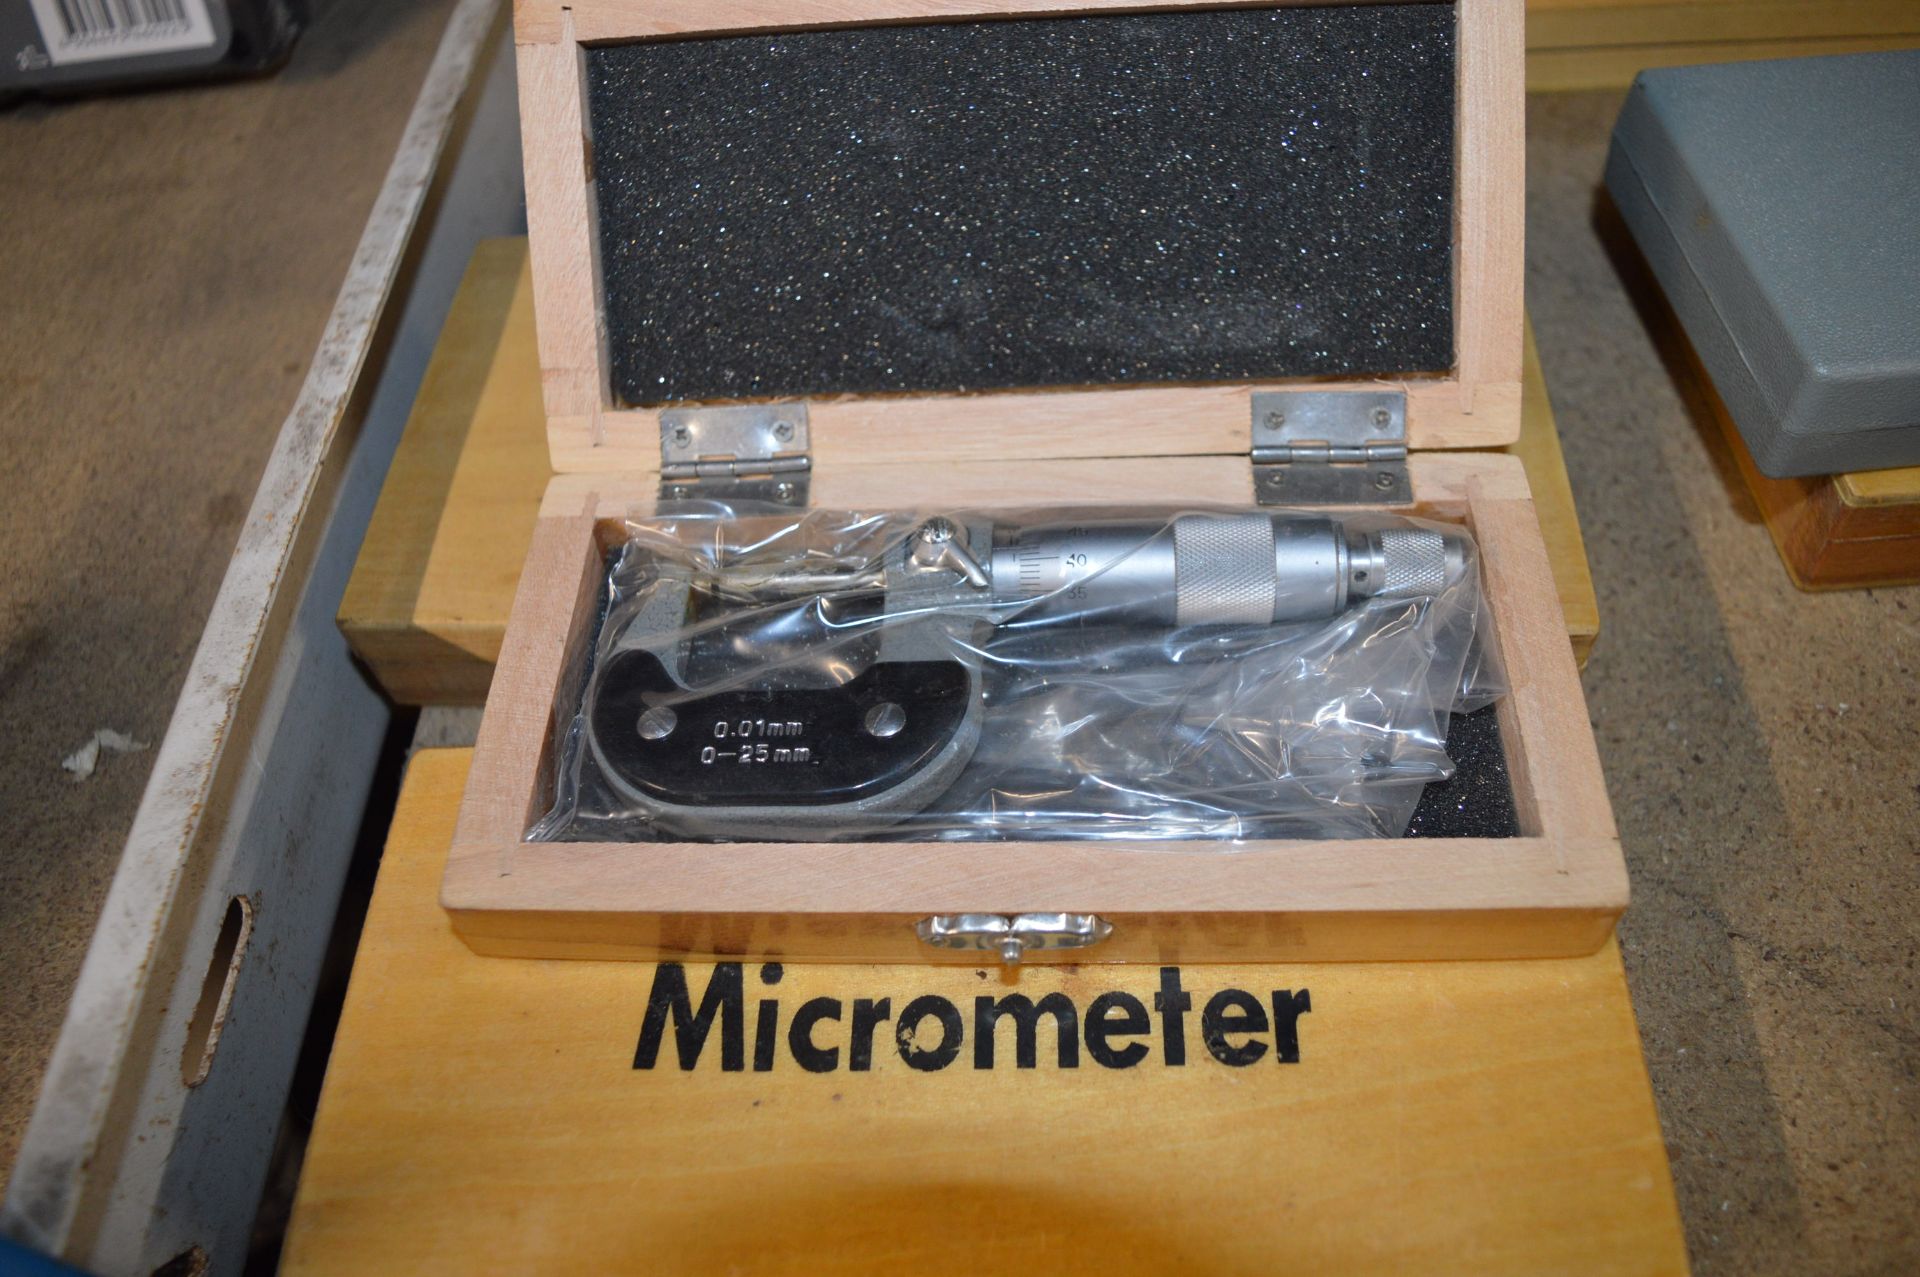 0-25mm, 25-50mm, and 50-75mm Micrometers